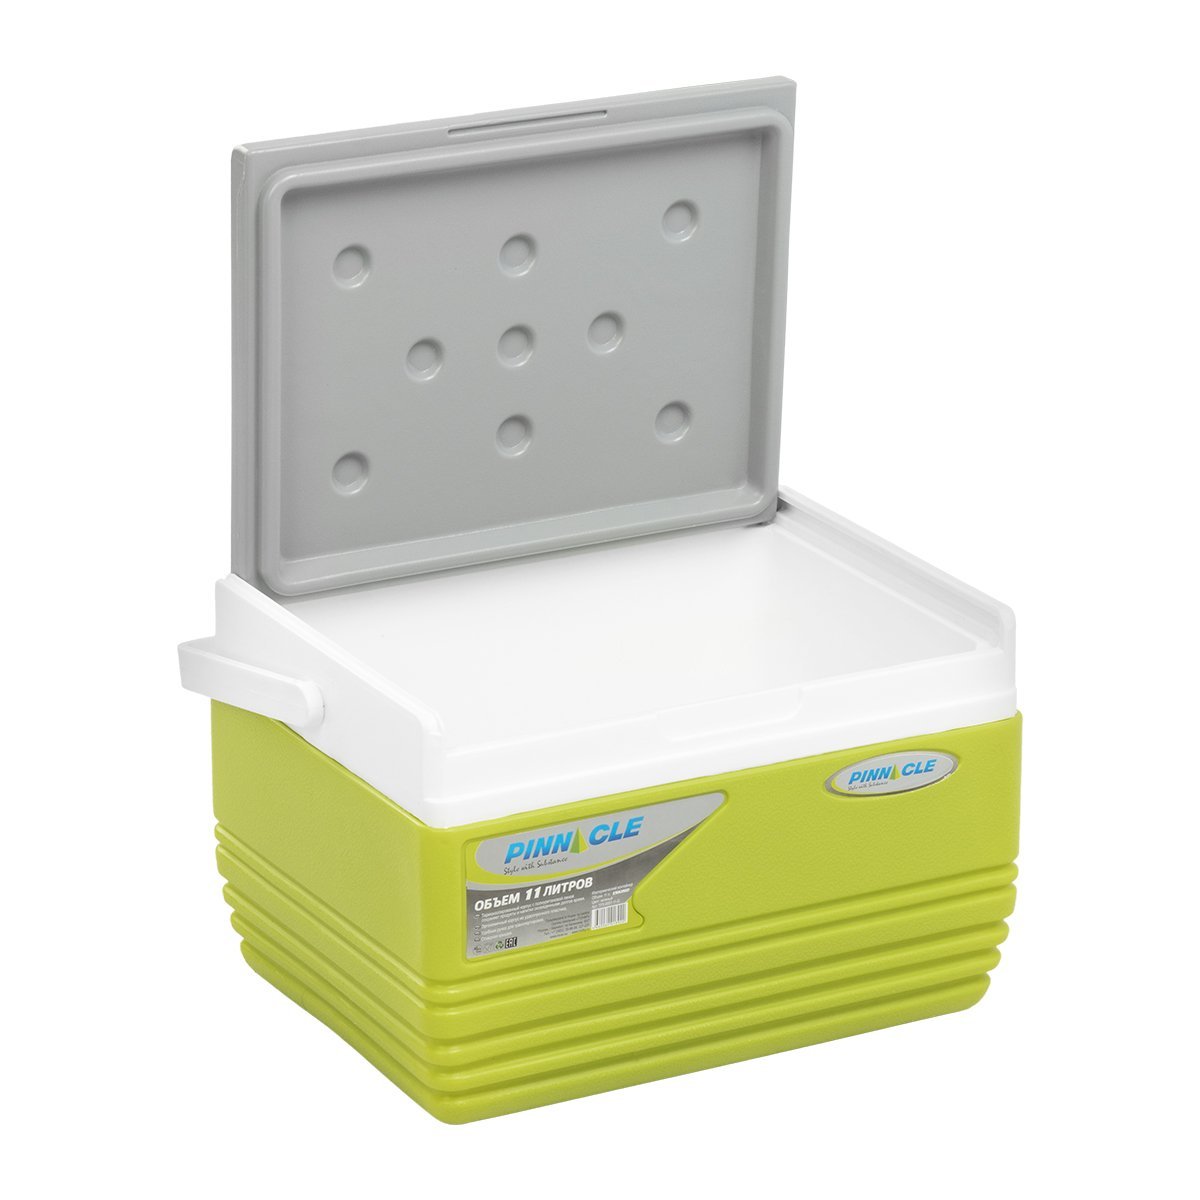 Eskimo Portable Hard-Sided Ice Chest for Camping, 11 qt, Green with a lid widely open